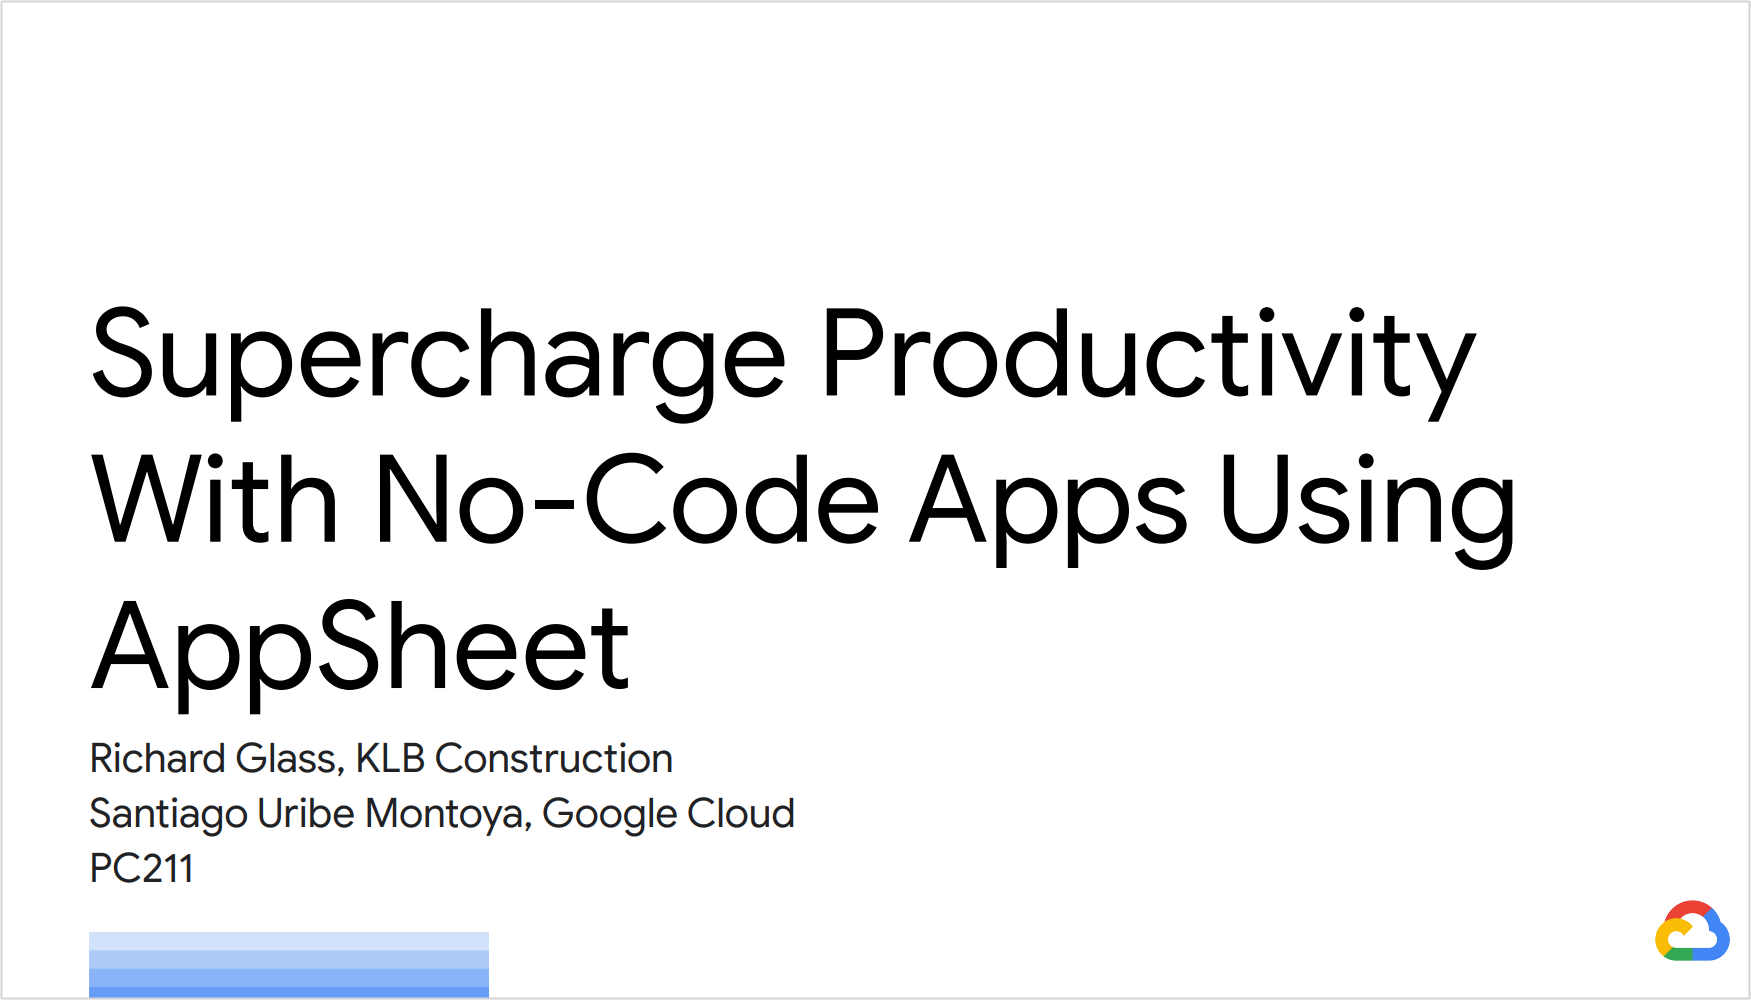 Supercharge Productivity With No-Code Apps Using AppSheet